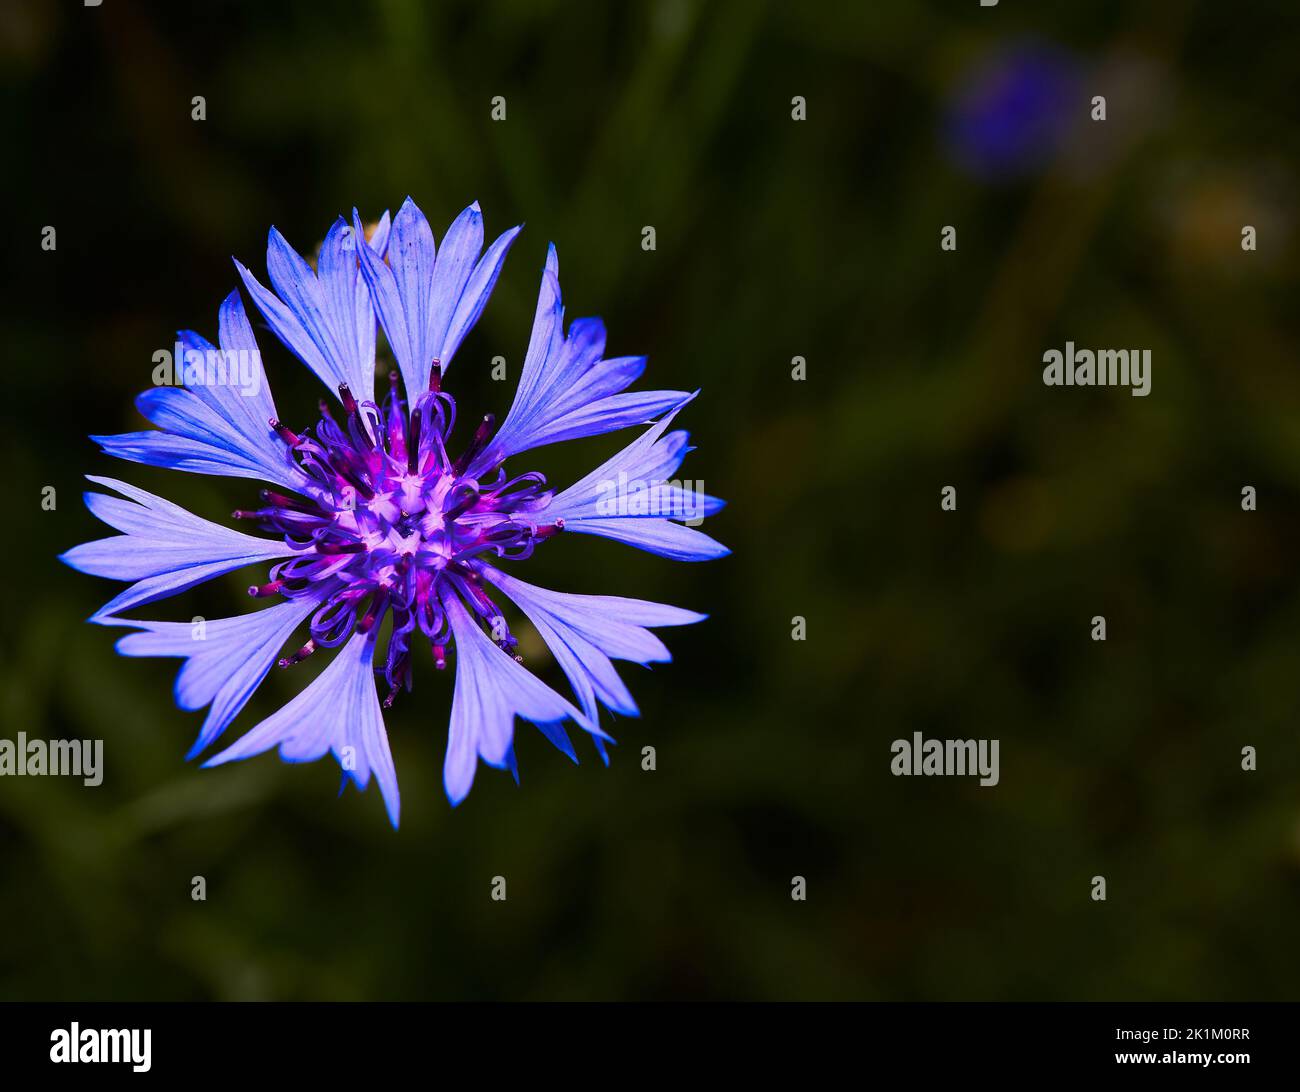 Blue and purple flower of the annual cornflower or centaurea cyranus, often considered a weed, member of the asteraceae family. Stock Photo